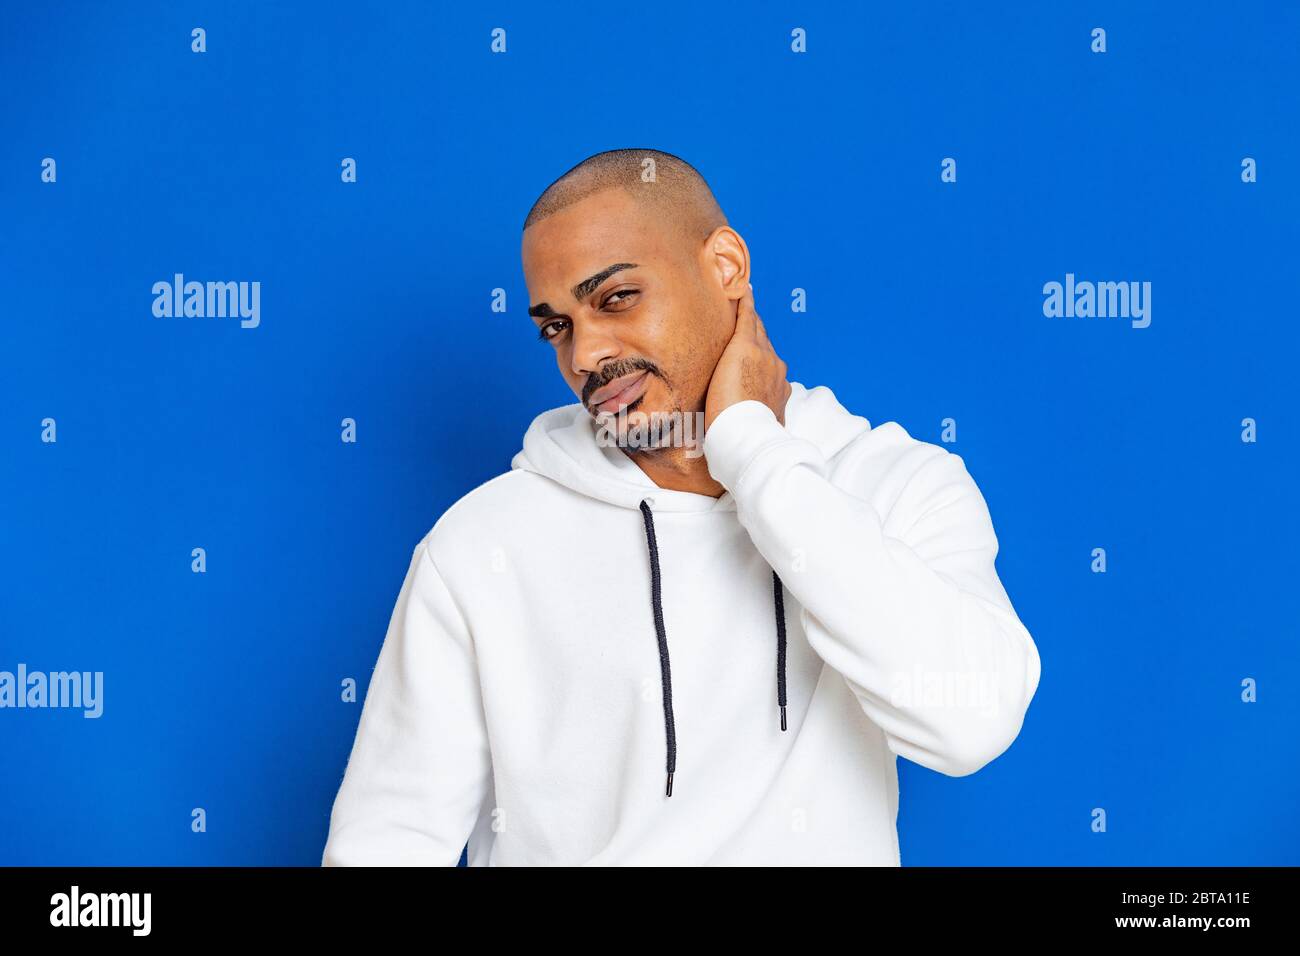 African guy wearing a white sweatshirt on a blue background Stock Photo